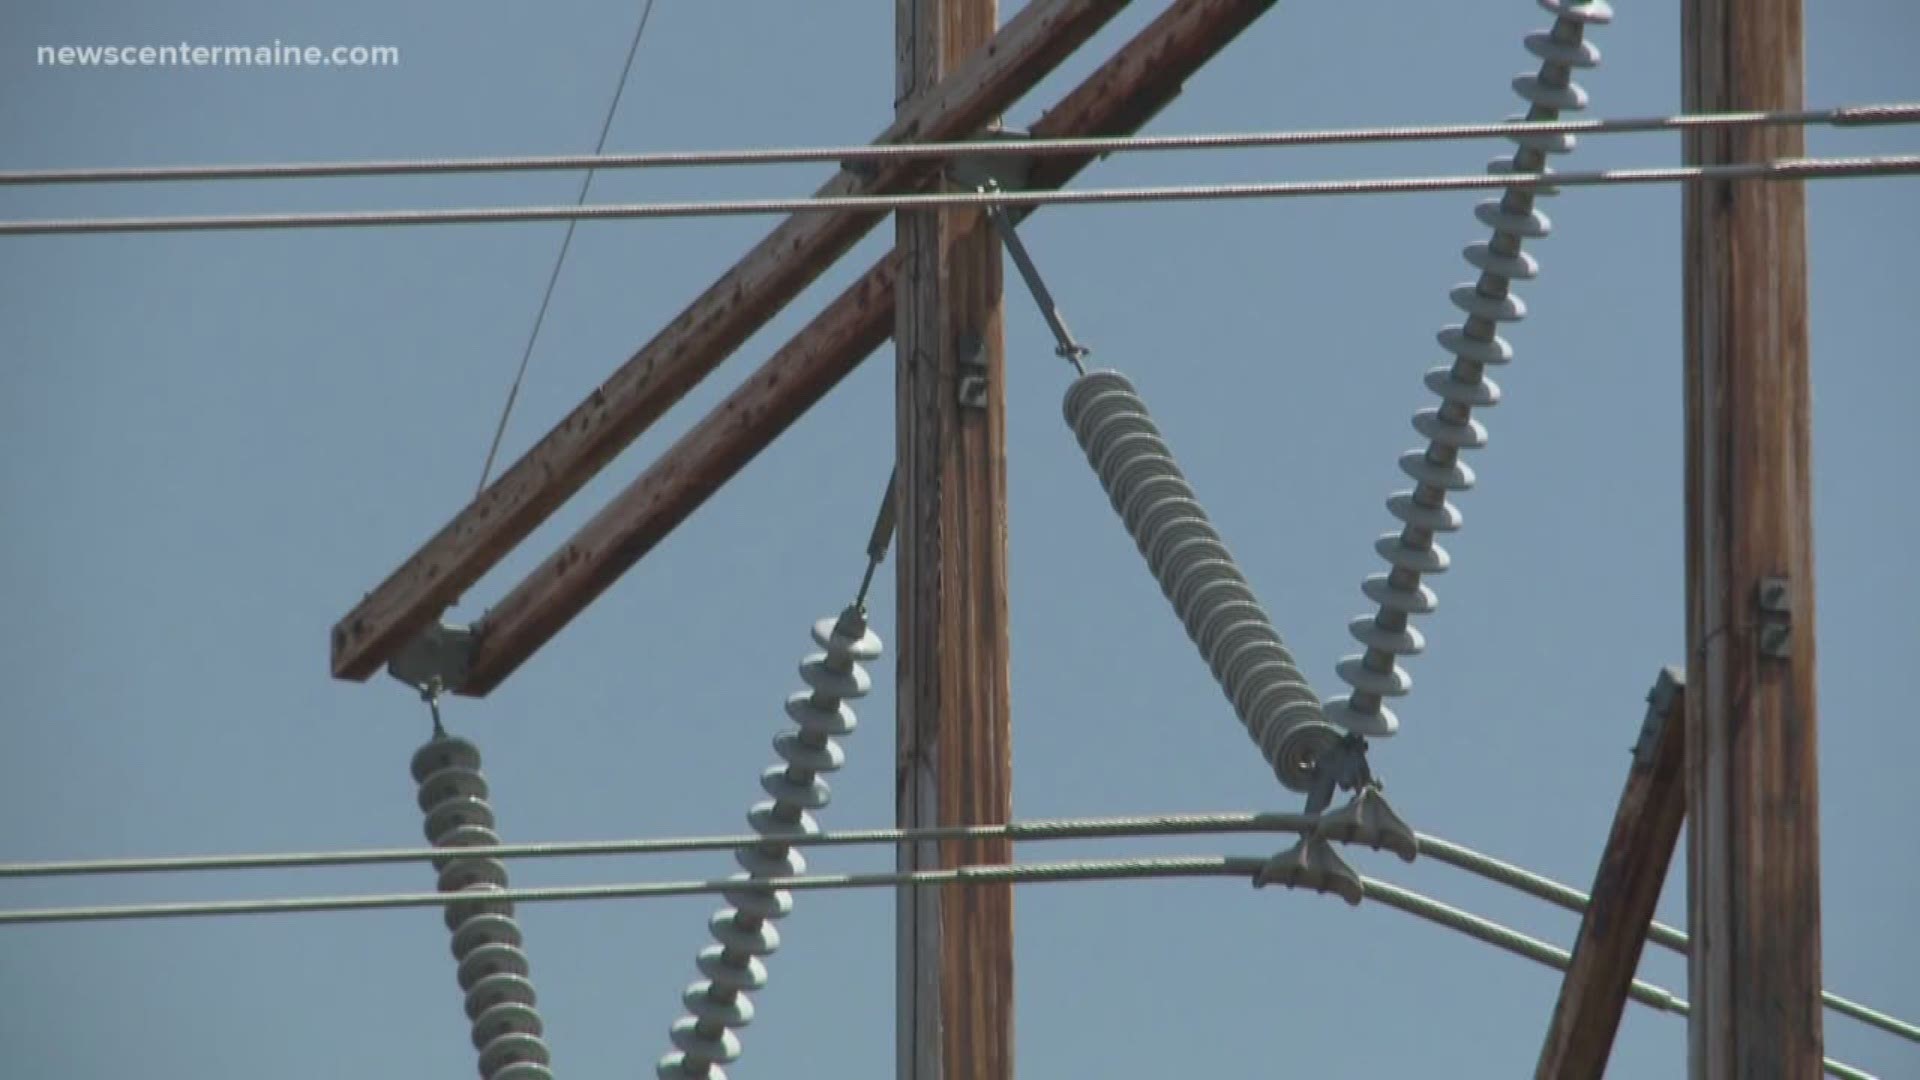 Hydro Quebec says that CMP's proposed transmission line will be good for New England.